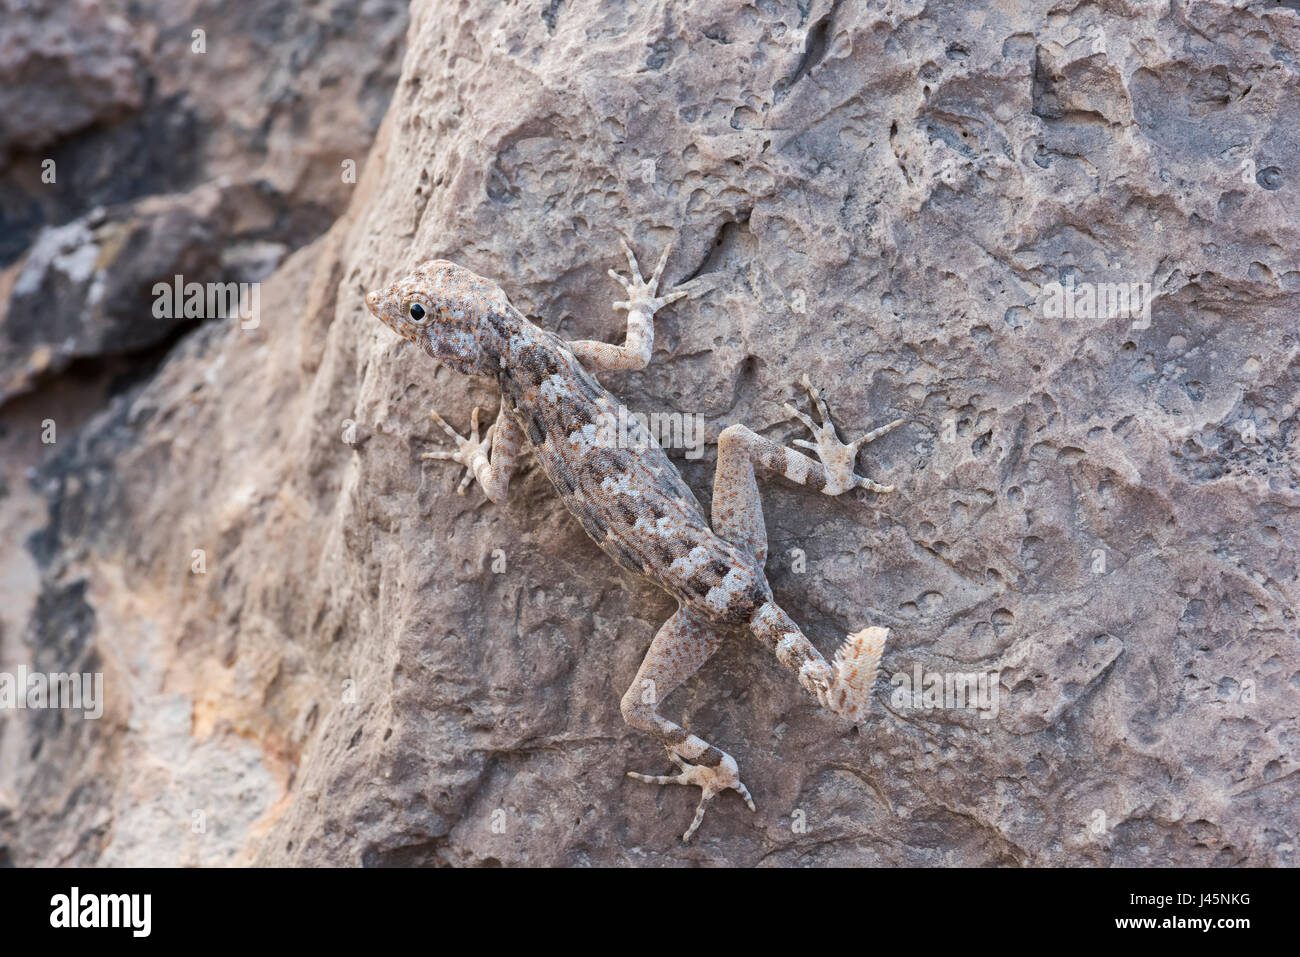 Rock semaphore gecko on a rock, found in Ras Hadd, Sultanate of Oman, wildlife observation, reptile species Stock Photo